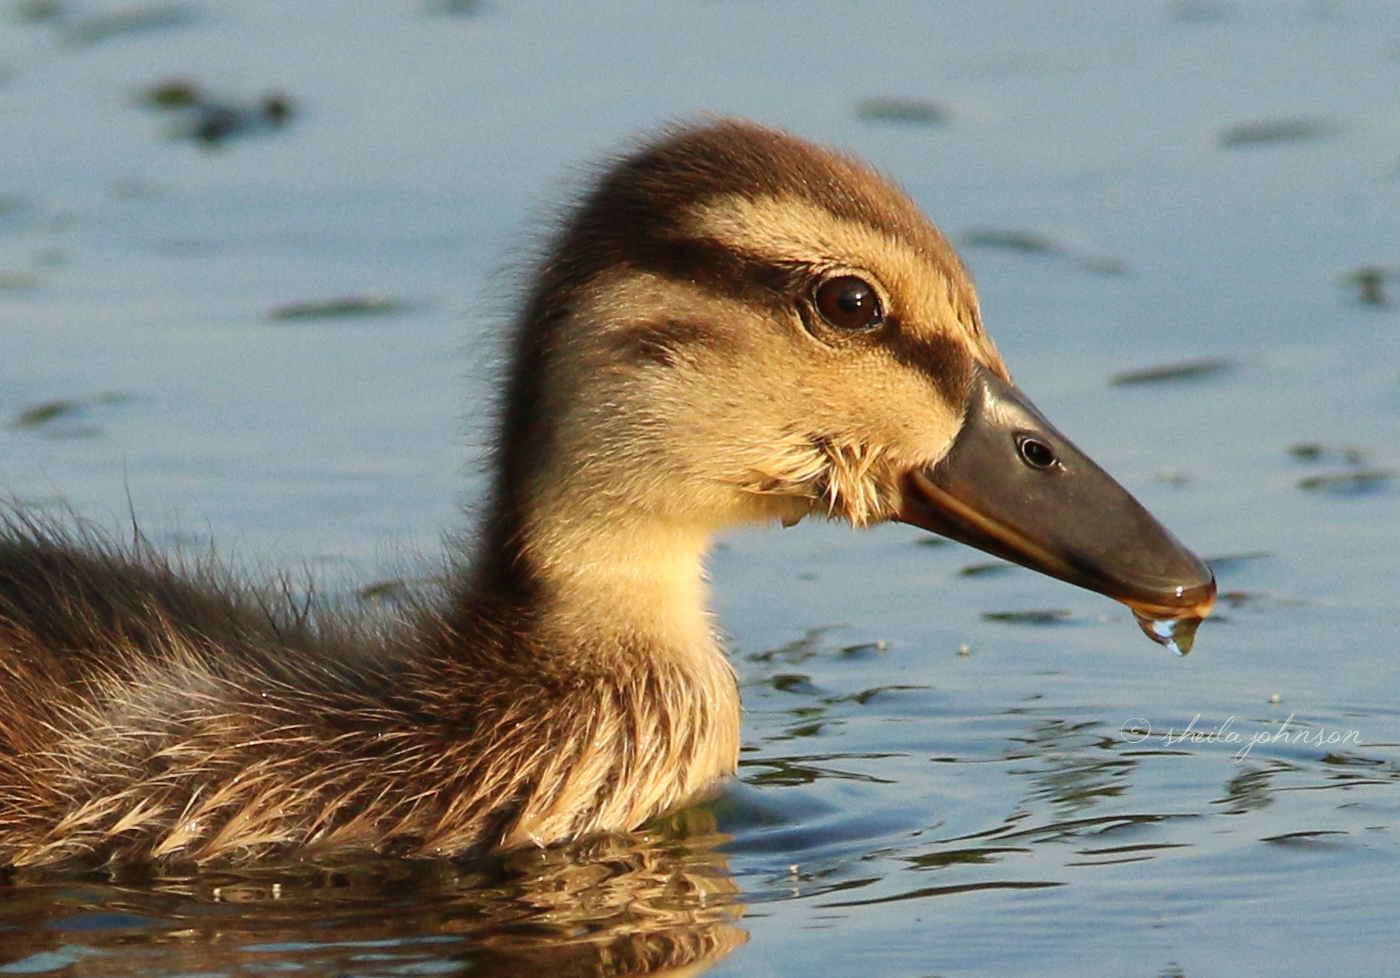 A Super-Cute Duckling Takes A Swim In The Gunpowder River, Joppa, Maryland. I Recently Learned That Ducklings Can Be Self-Sufficient From The Day They Hatch.